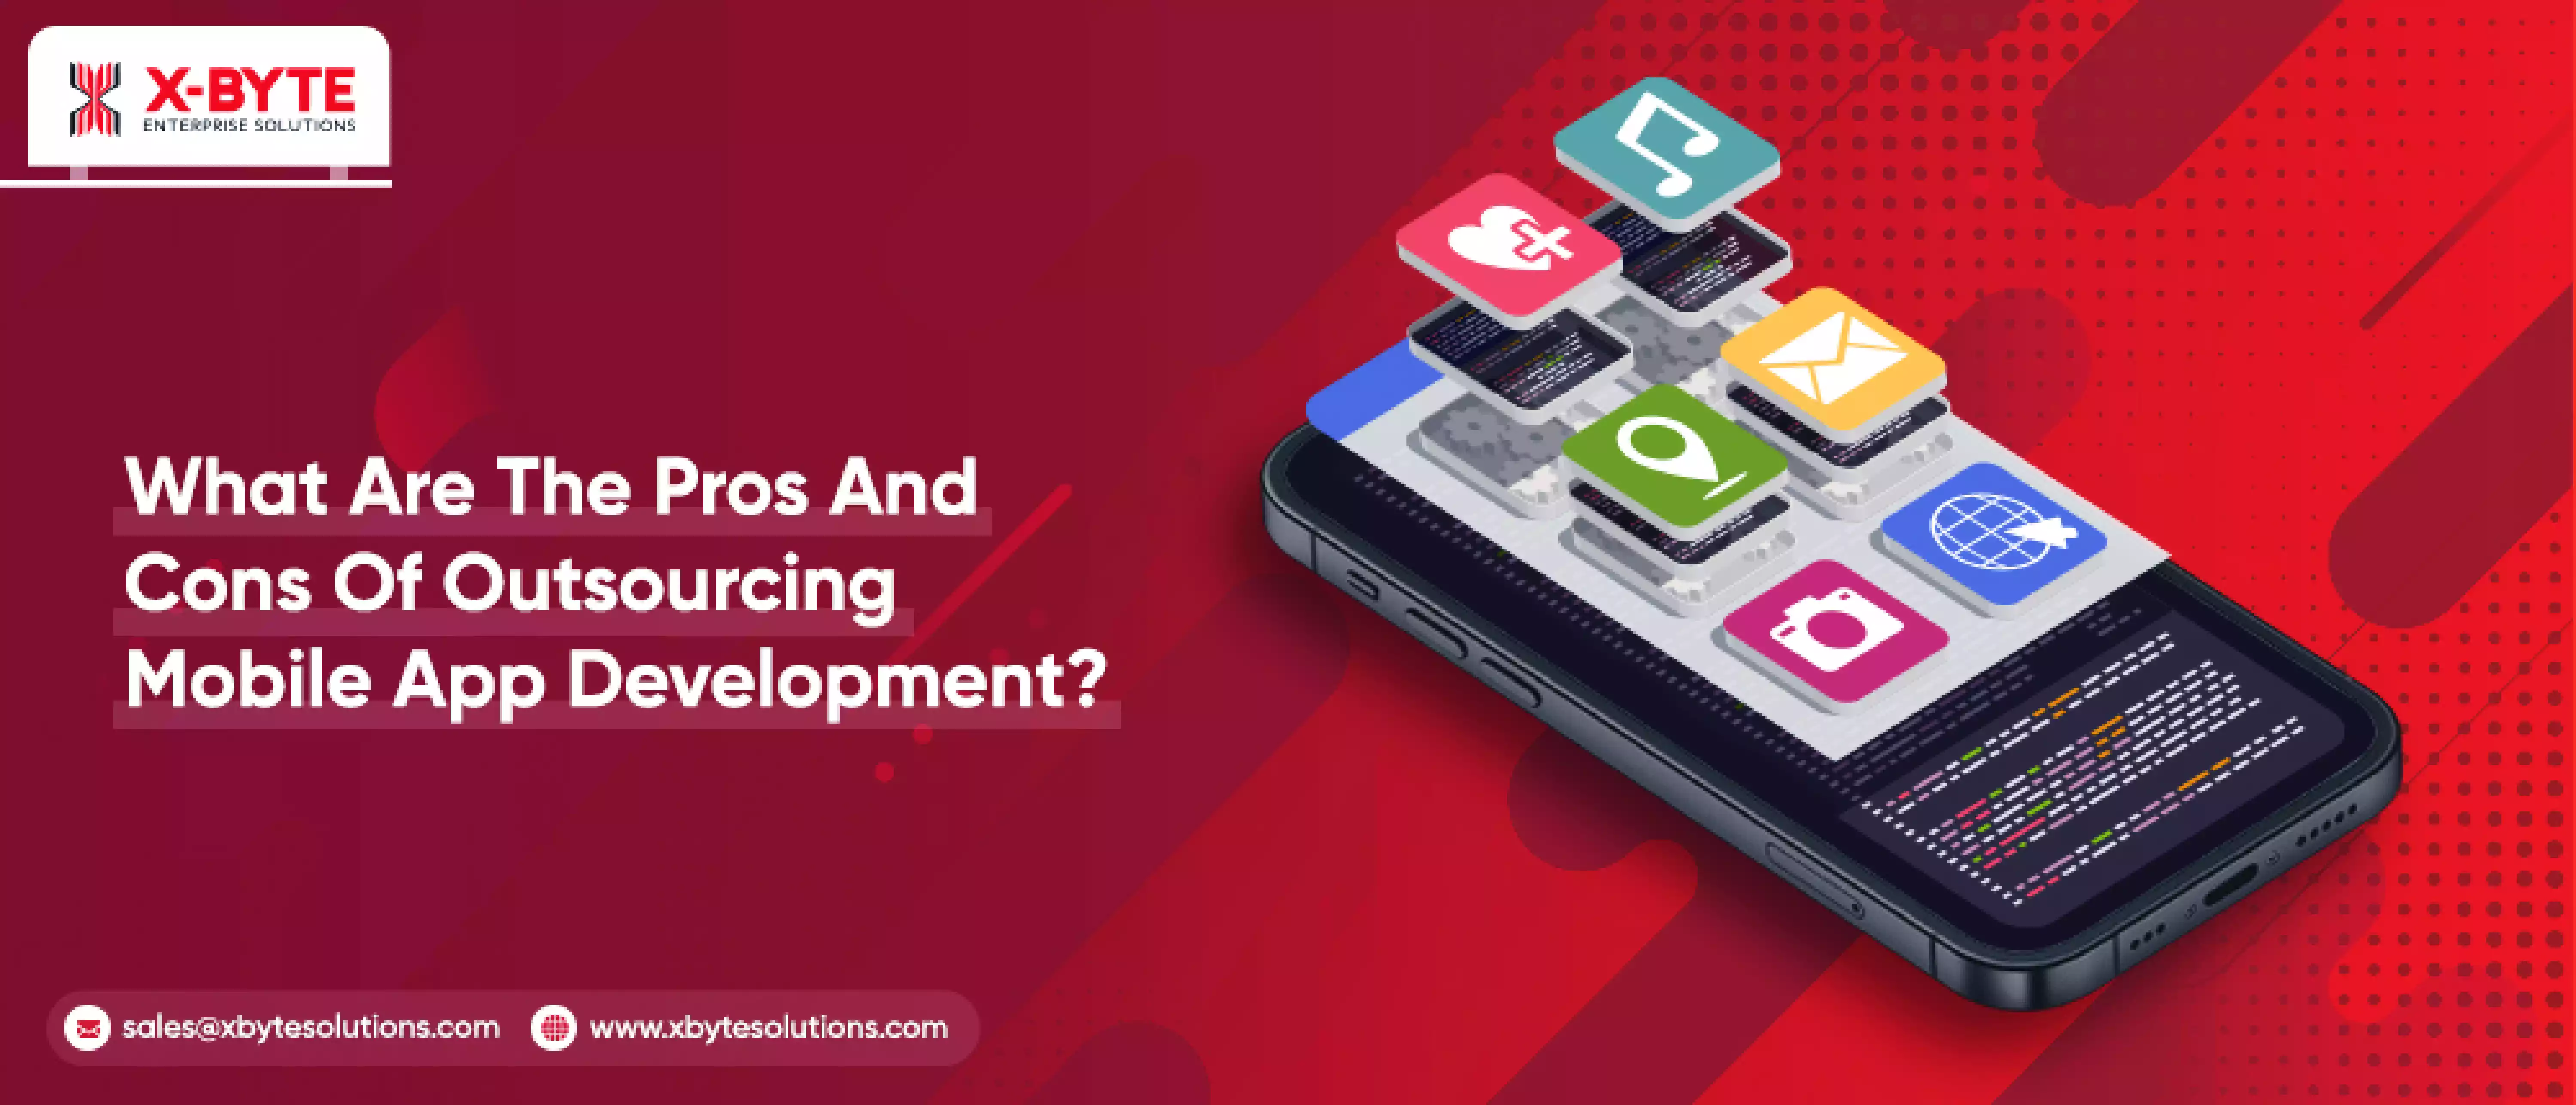 What Are The Pros & Cons Of Outsourcing Mobile App Development